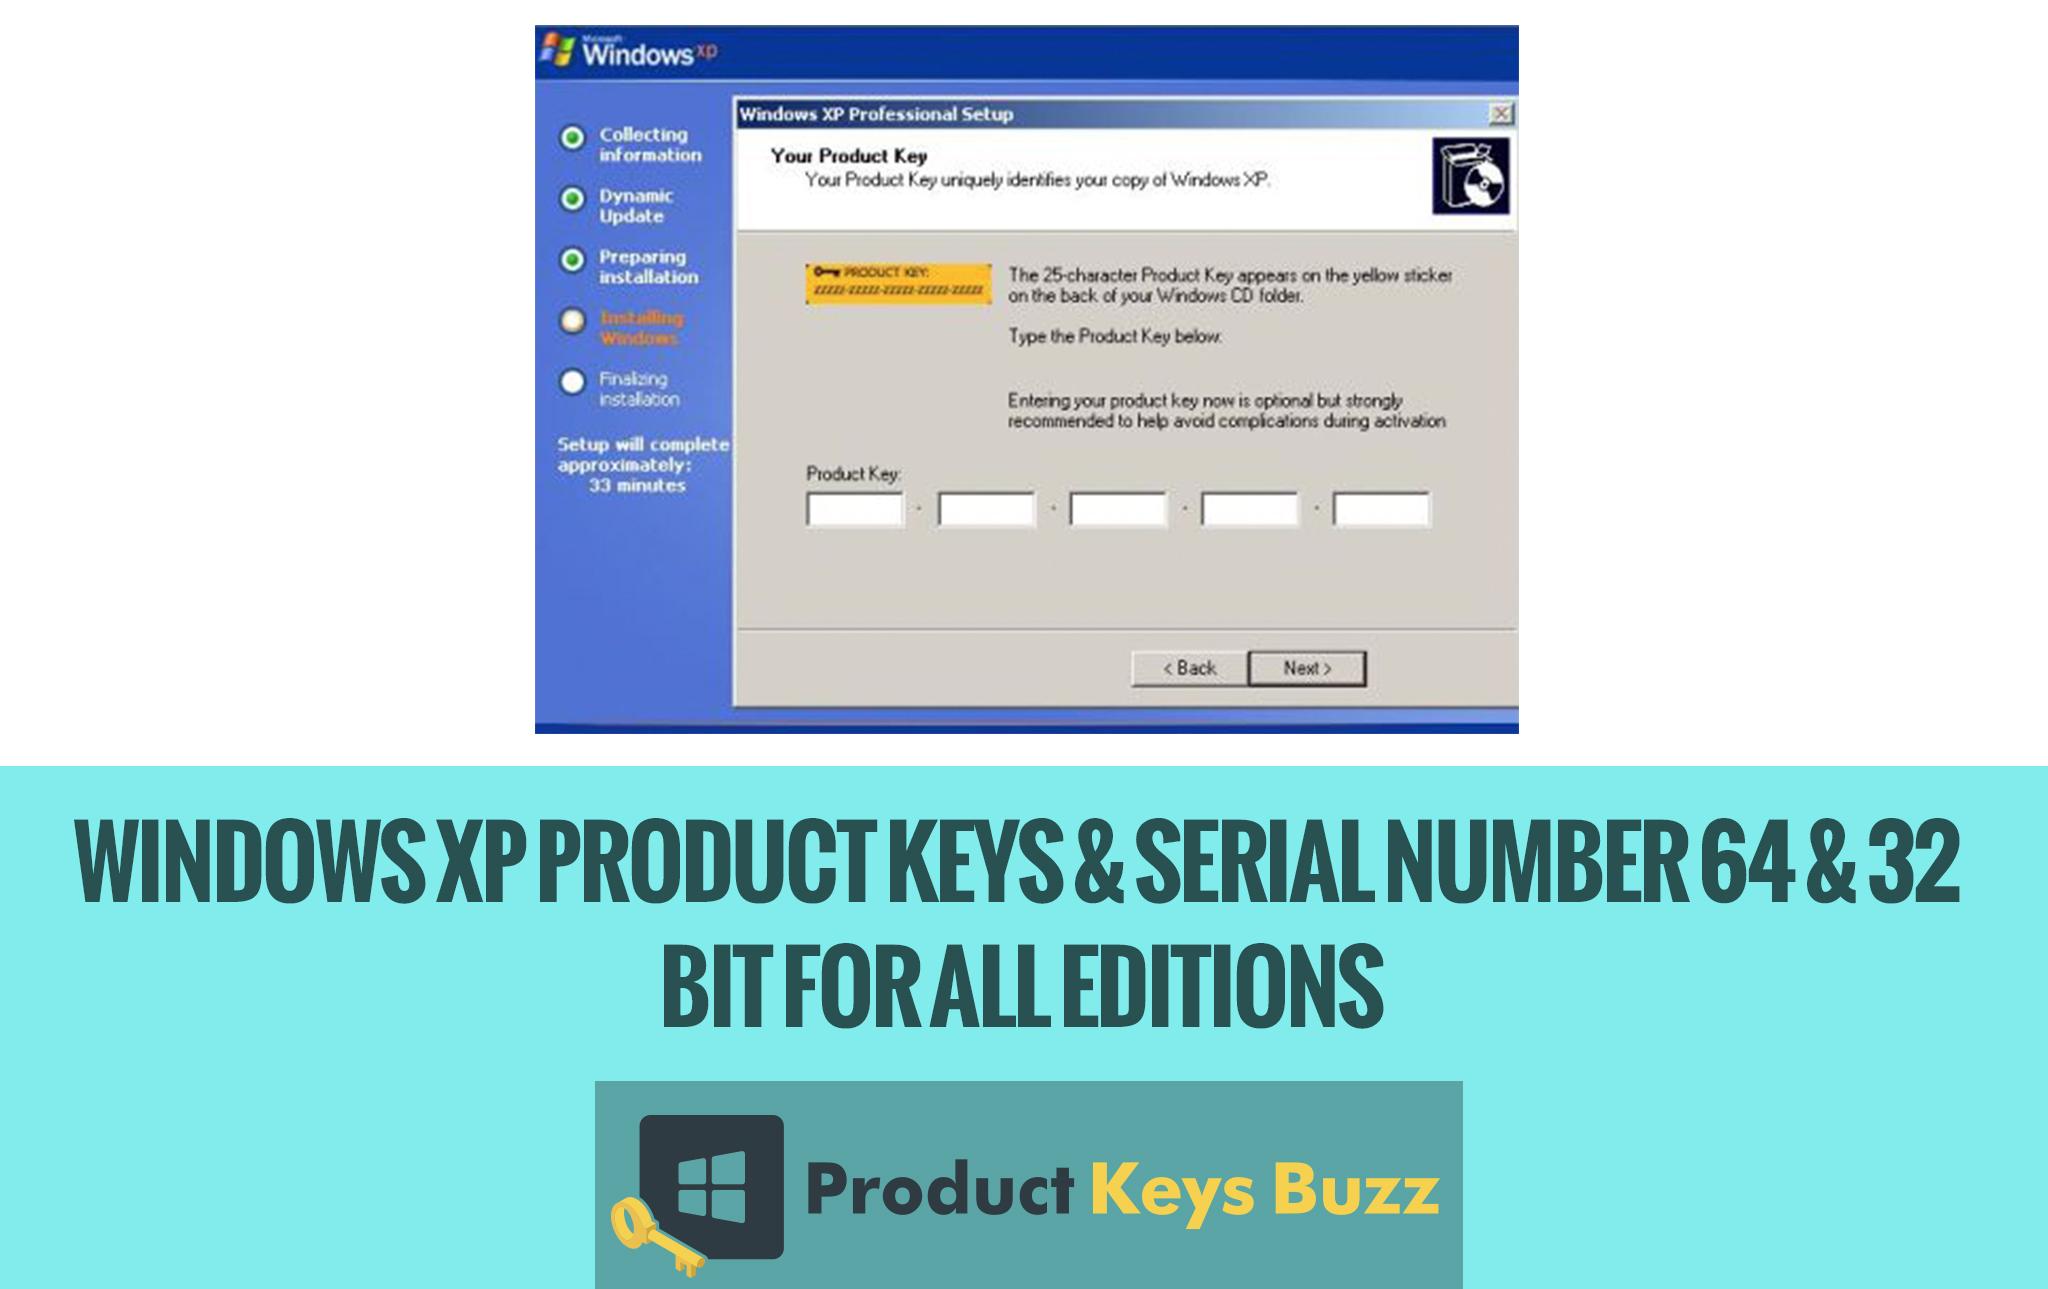 igor pro serial number and activation key